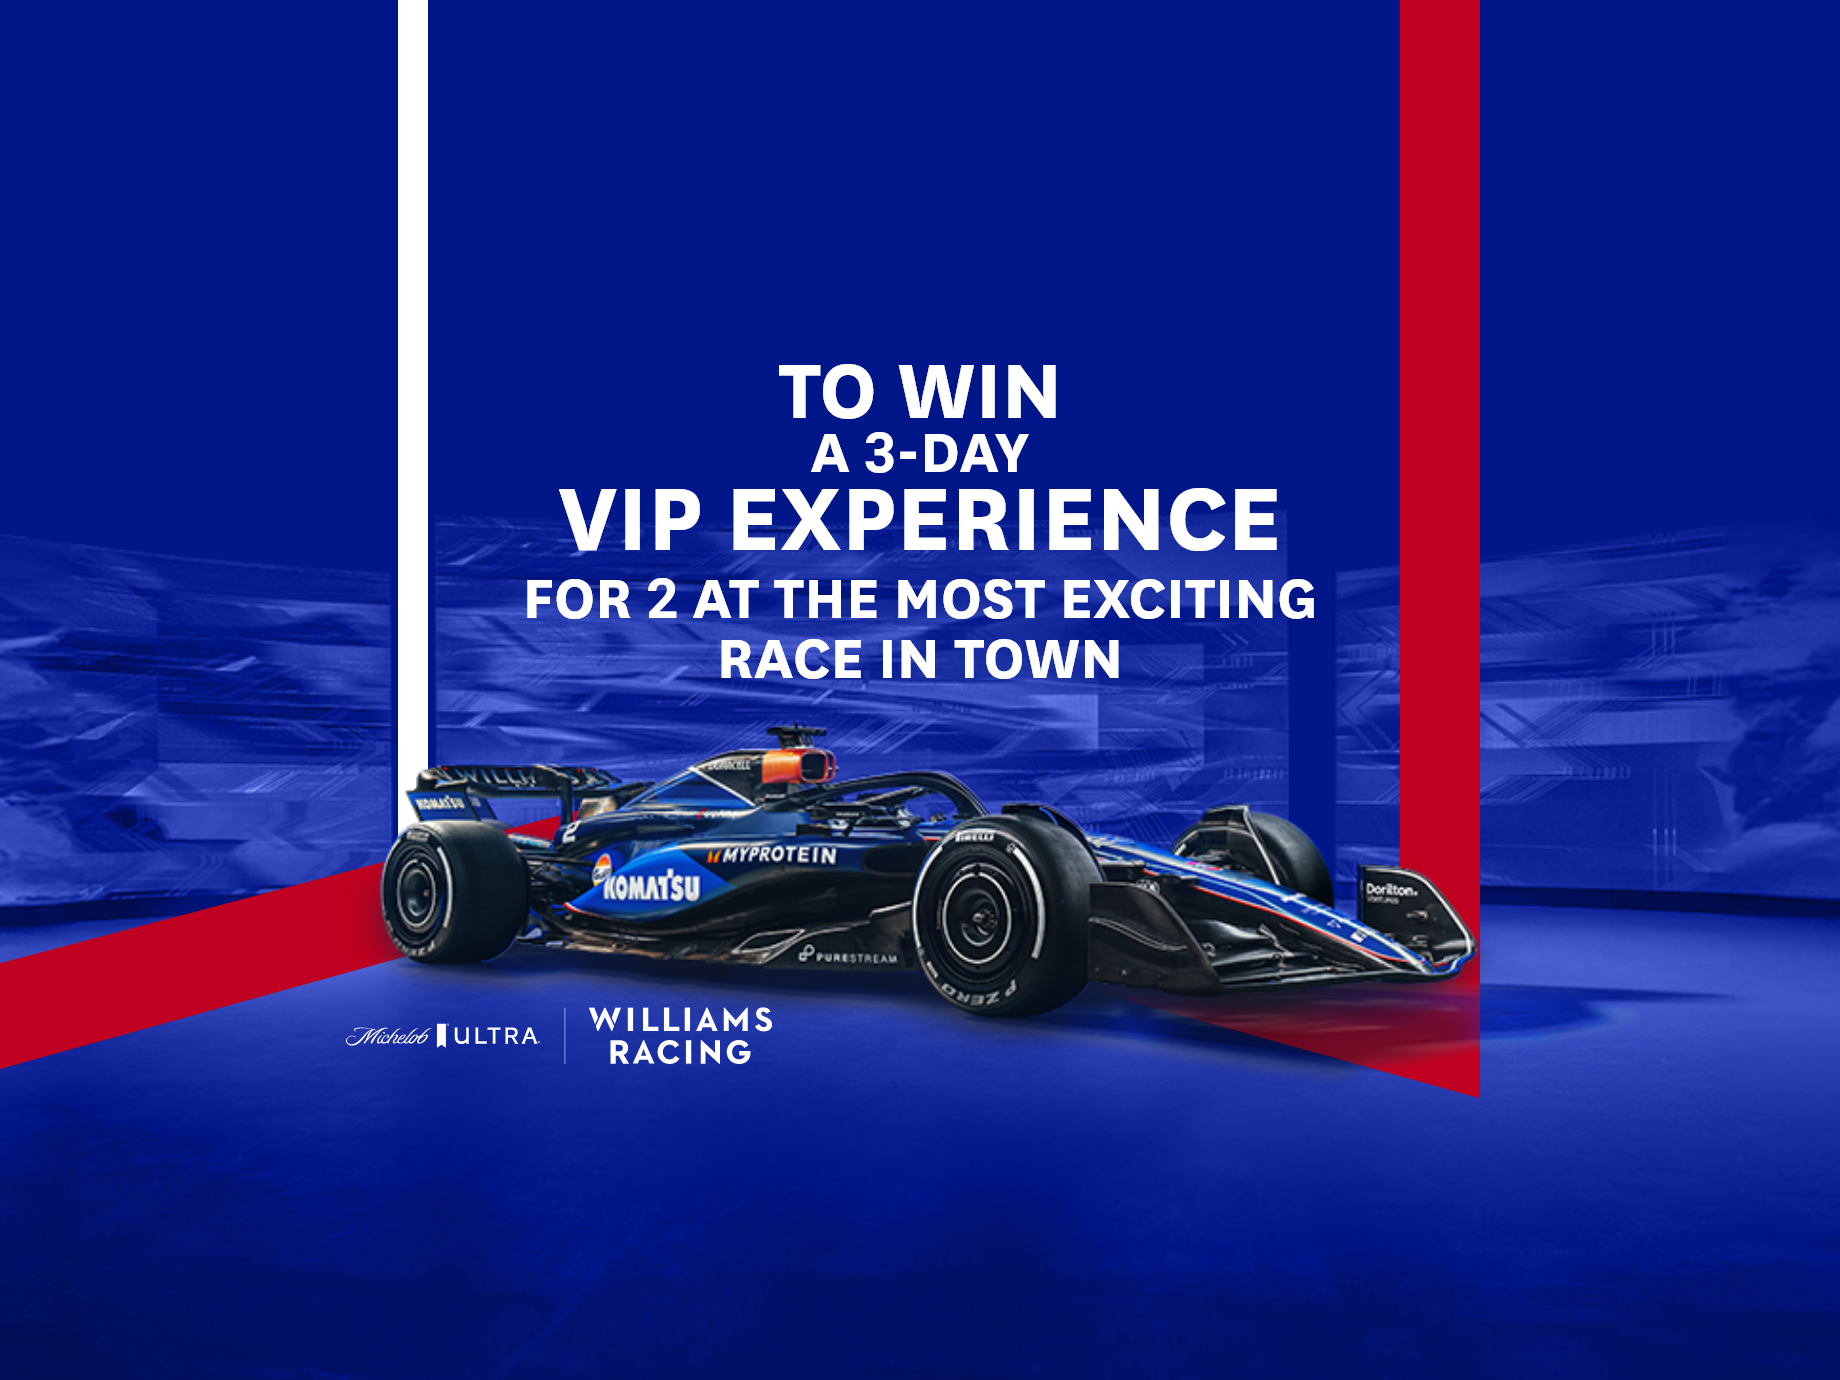 TO WIN A 3-DAY VIP EXPERIENCE FOR 2 AT THE MOST EXCITING RACE IN TOWN